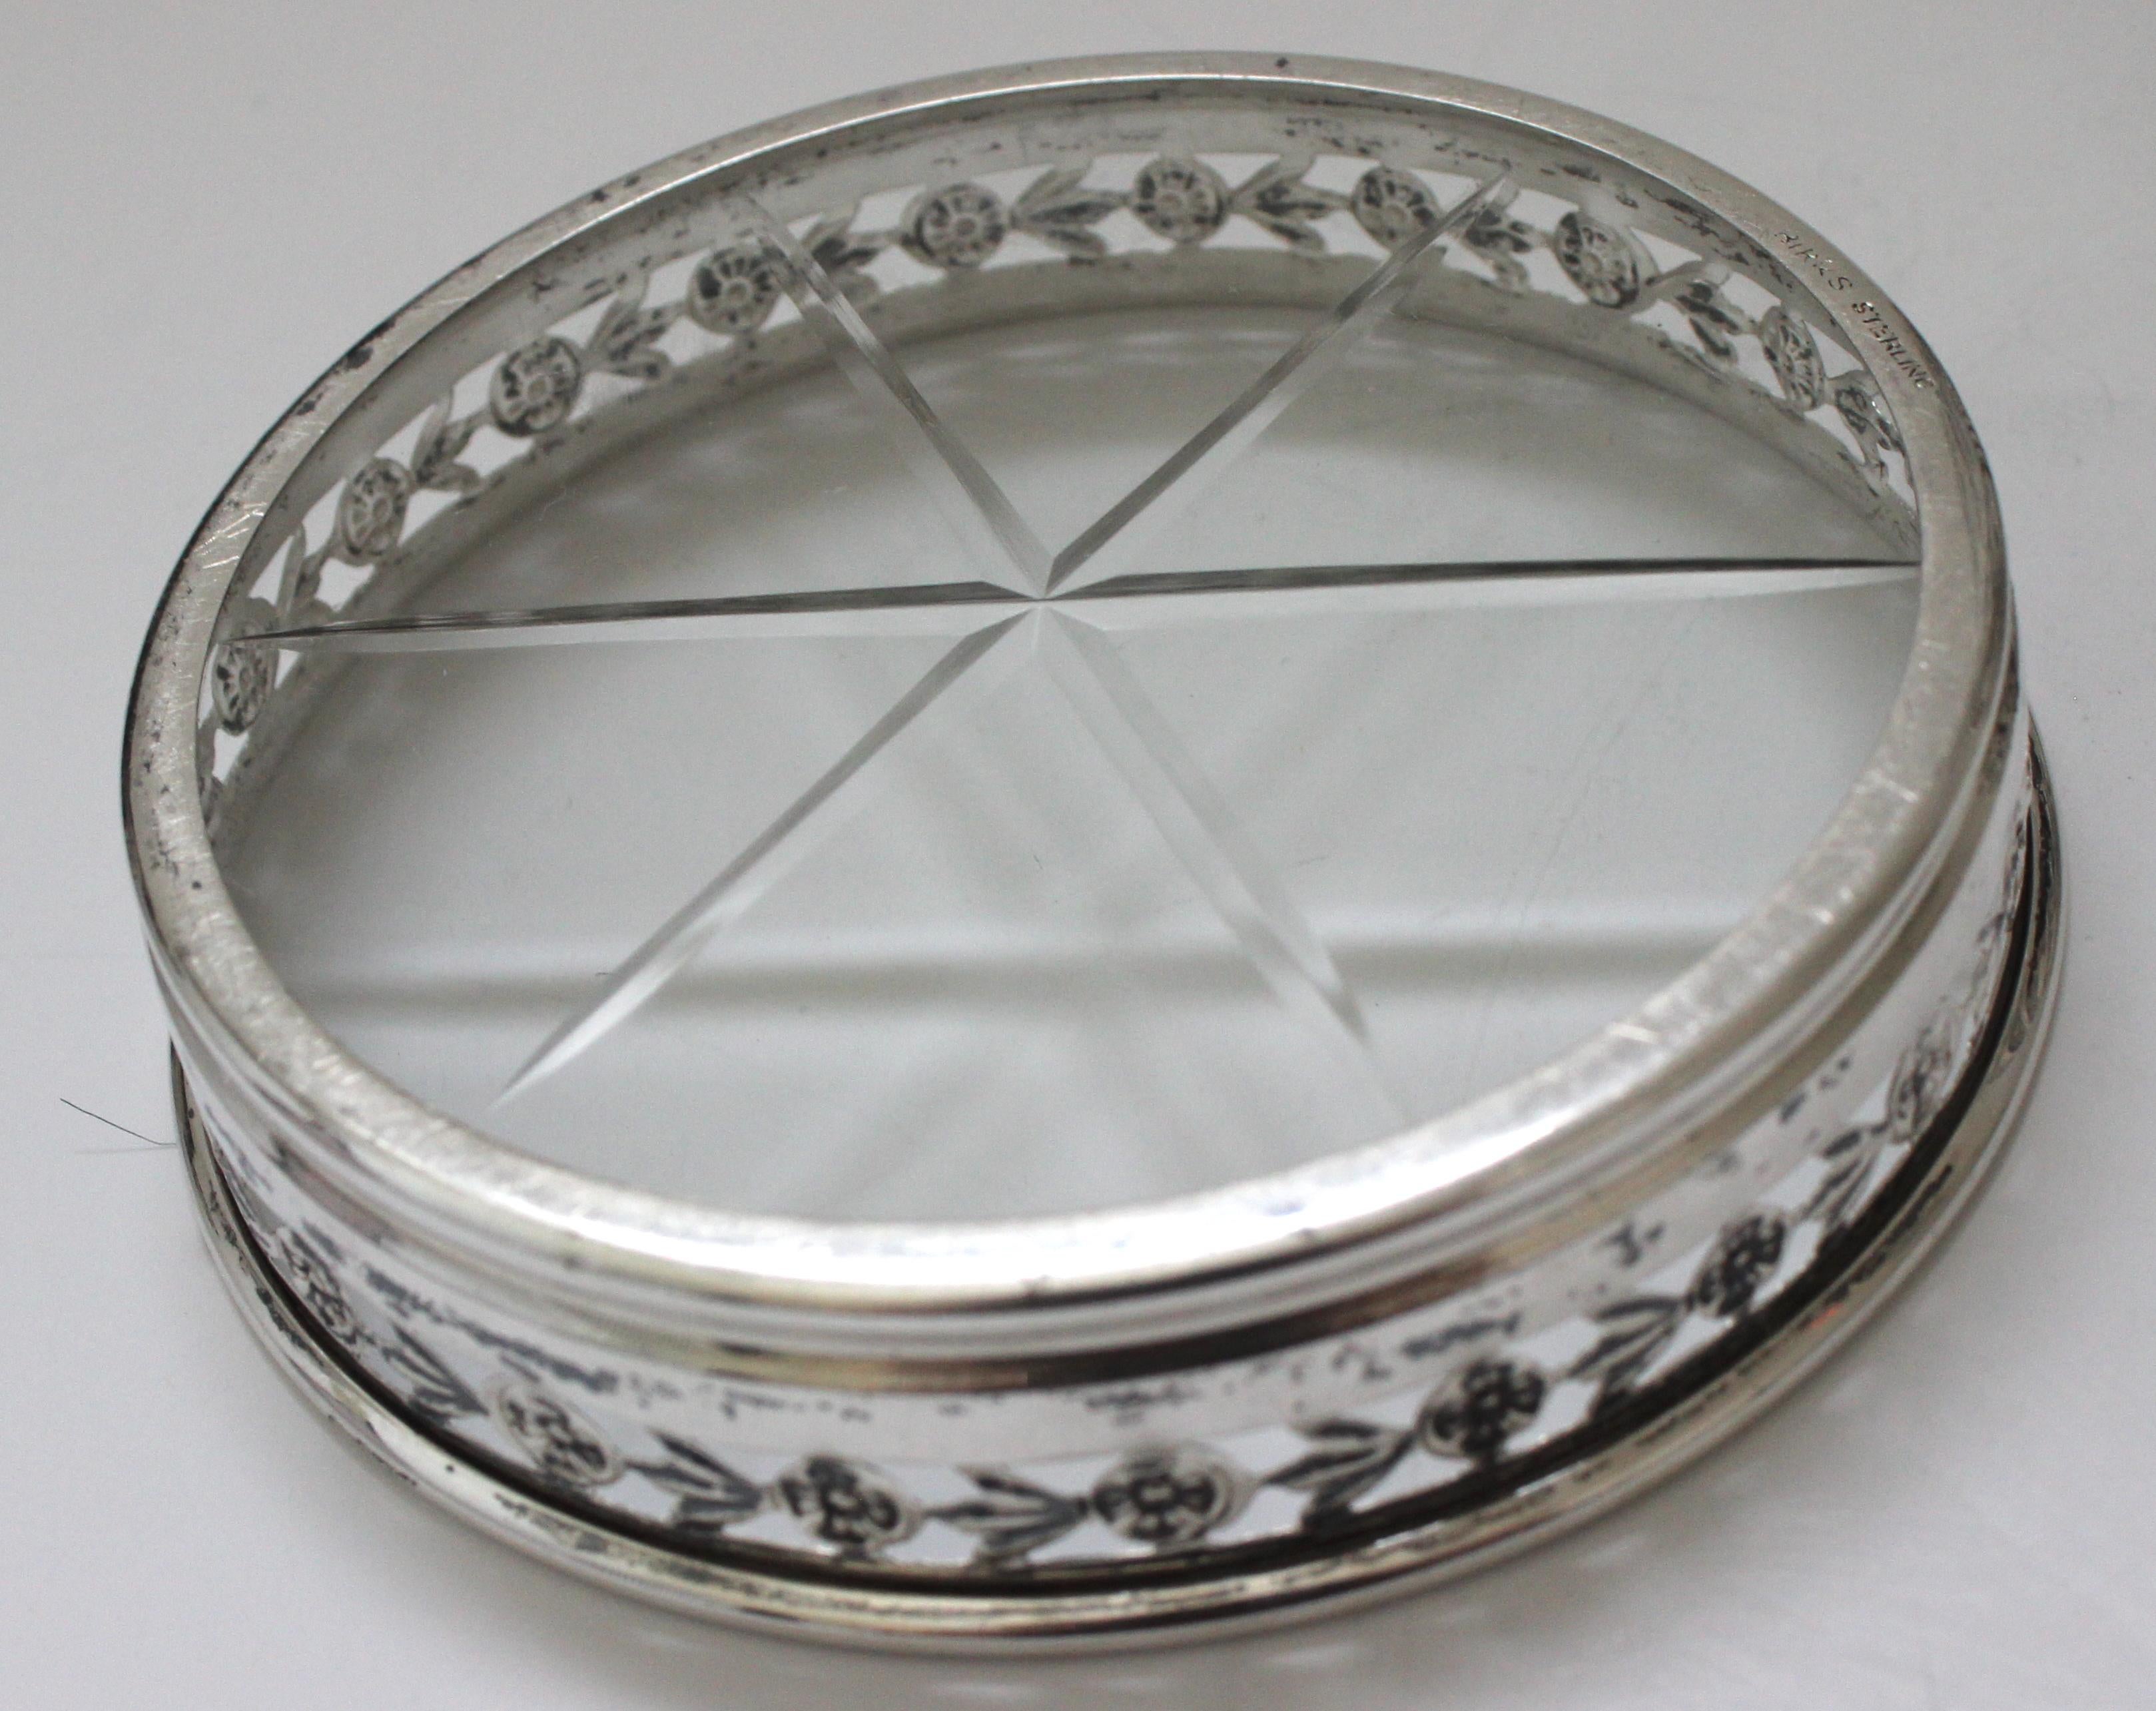 American Sterling Silver Coaster Set by Birks